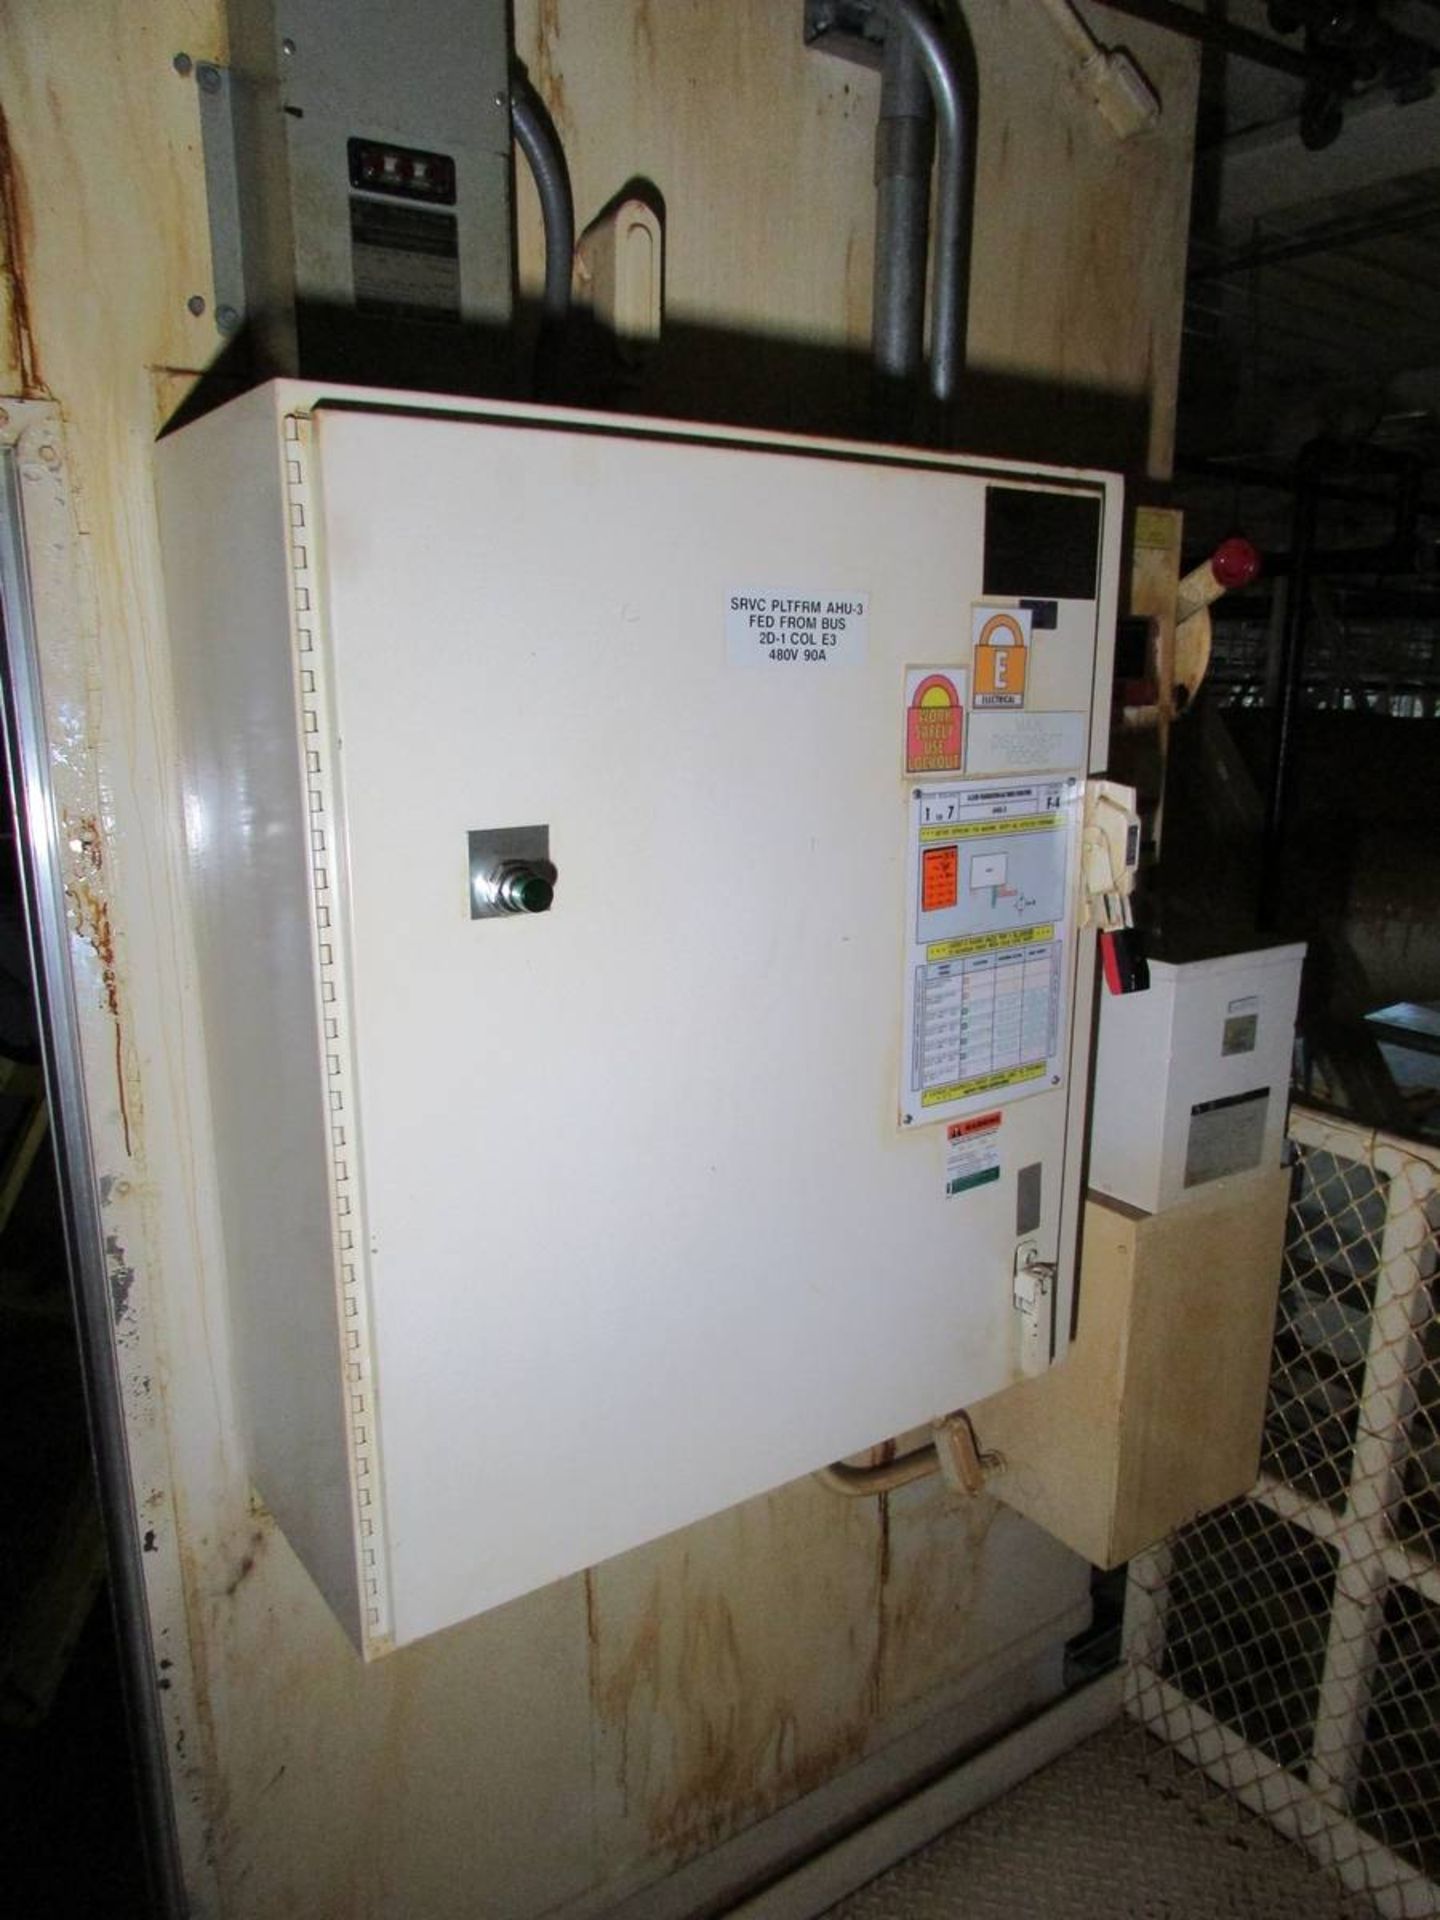 2000 Webco CUS-35 Overhead Air Handling Unit - Image 13 of 16